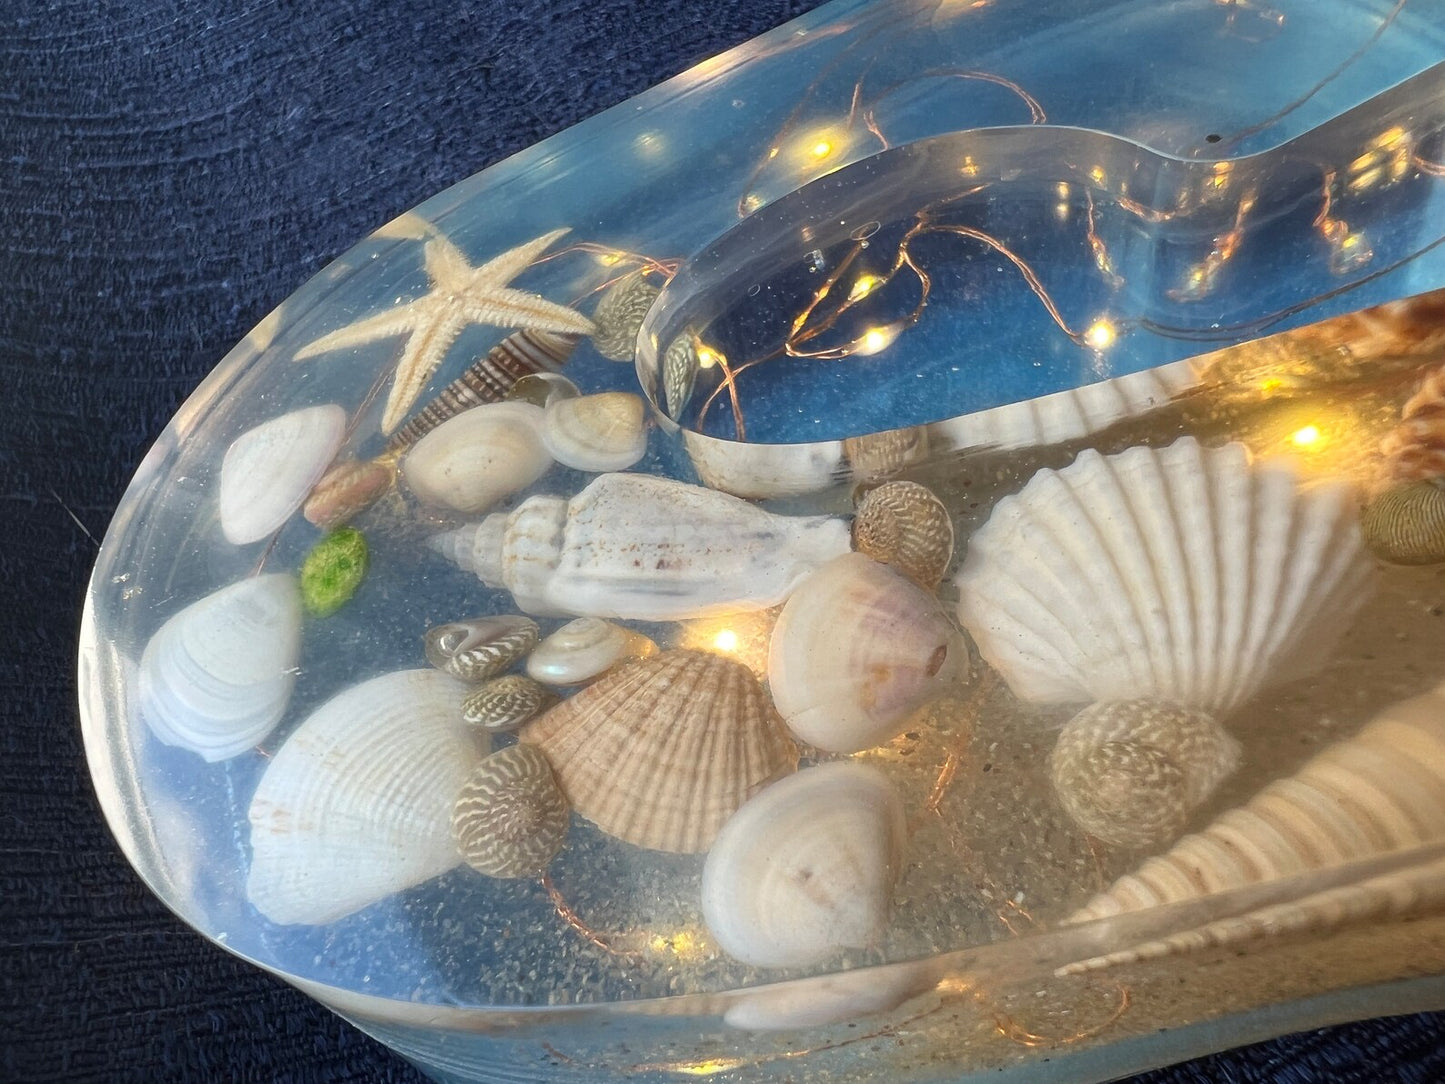 Personalized Resin Letters with Seashells and Fairy Lights - Made to Order